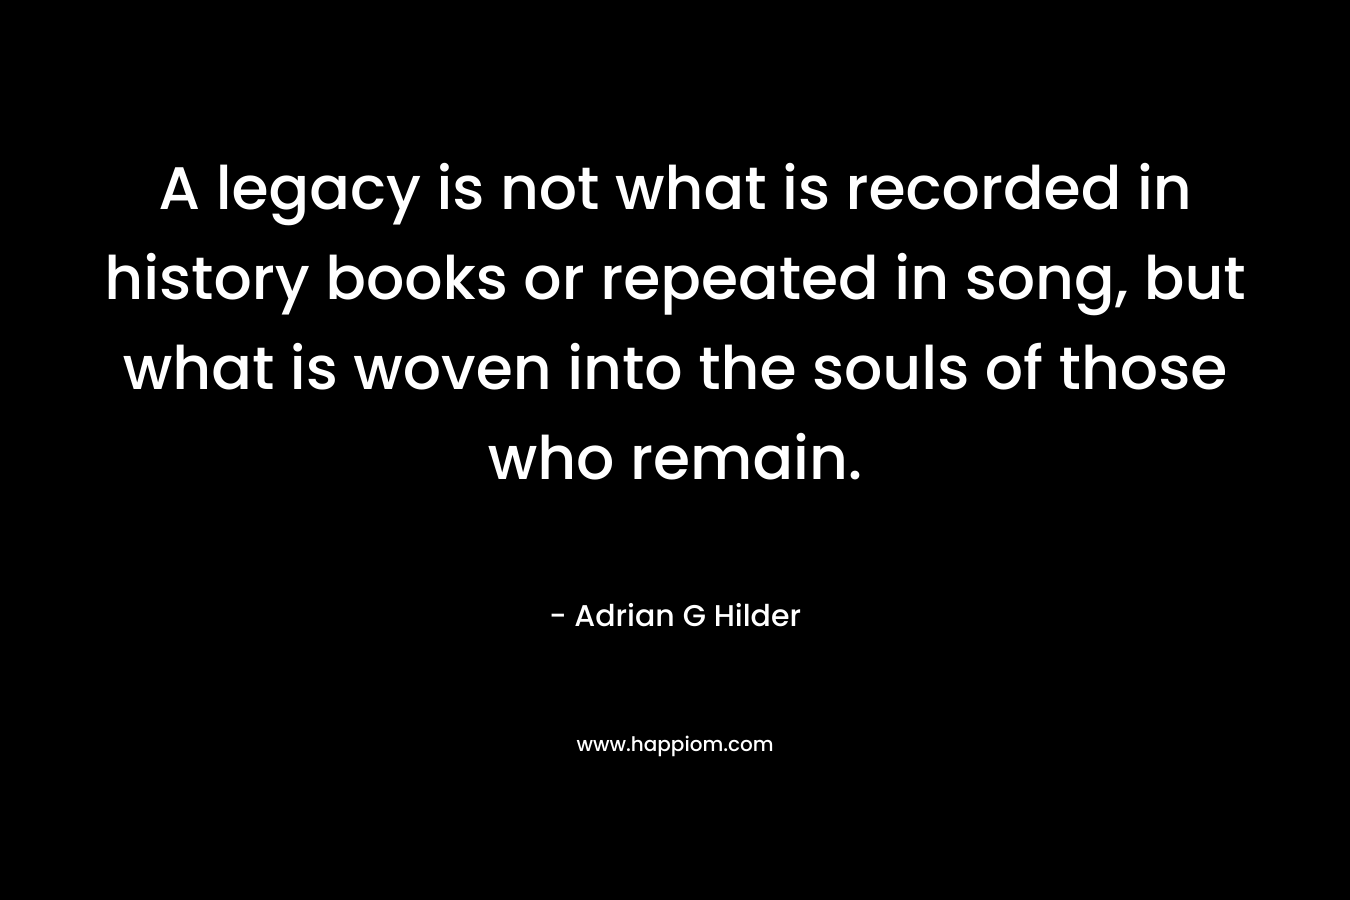 A legacy is not what is recorded in history books or repeated in song, but what is woven into the souls of those who remain.